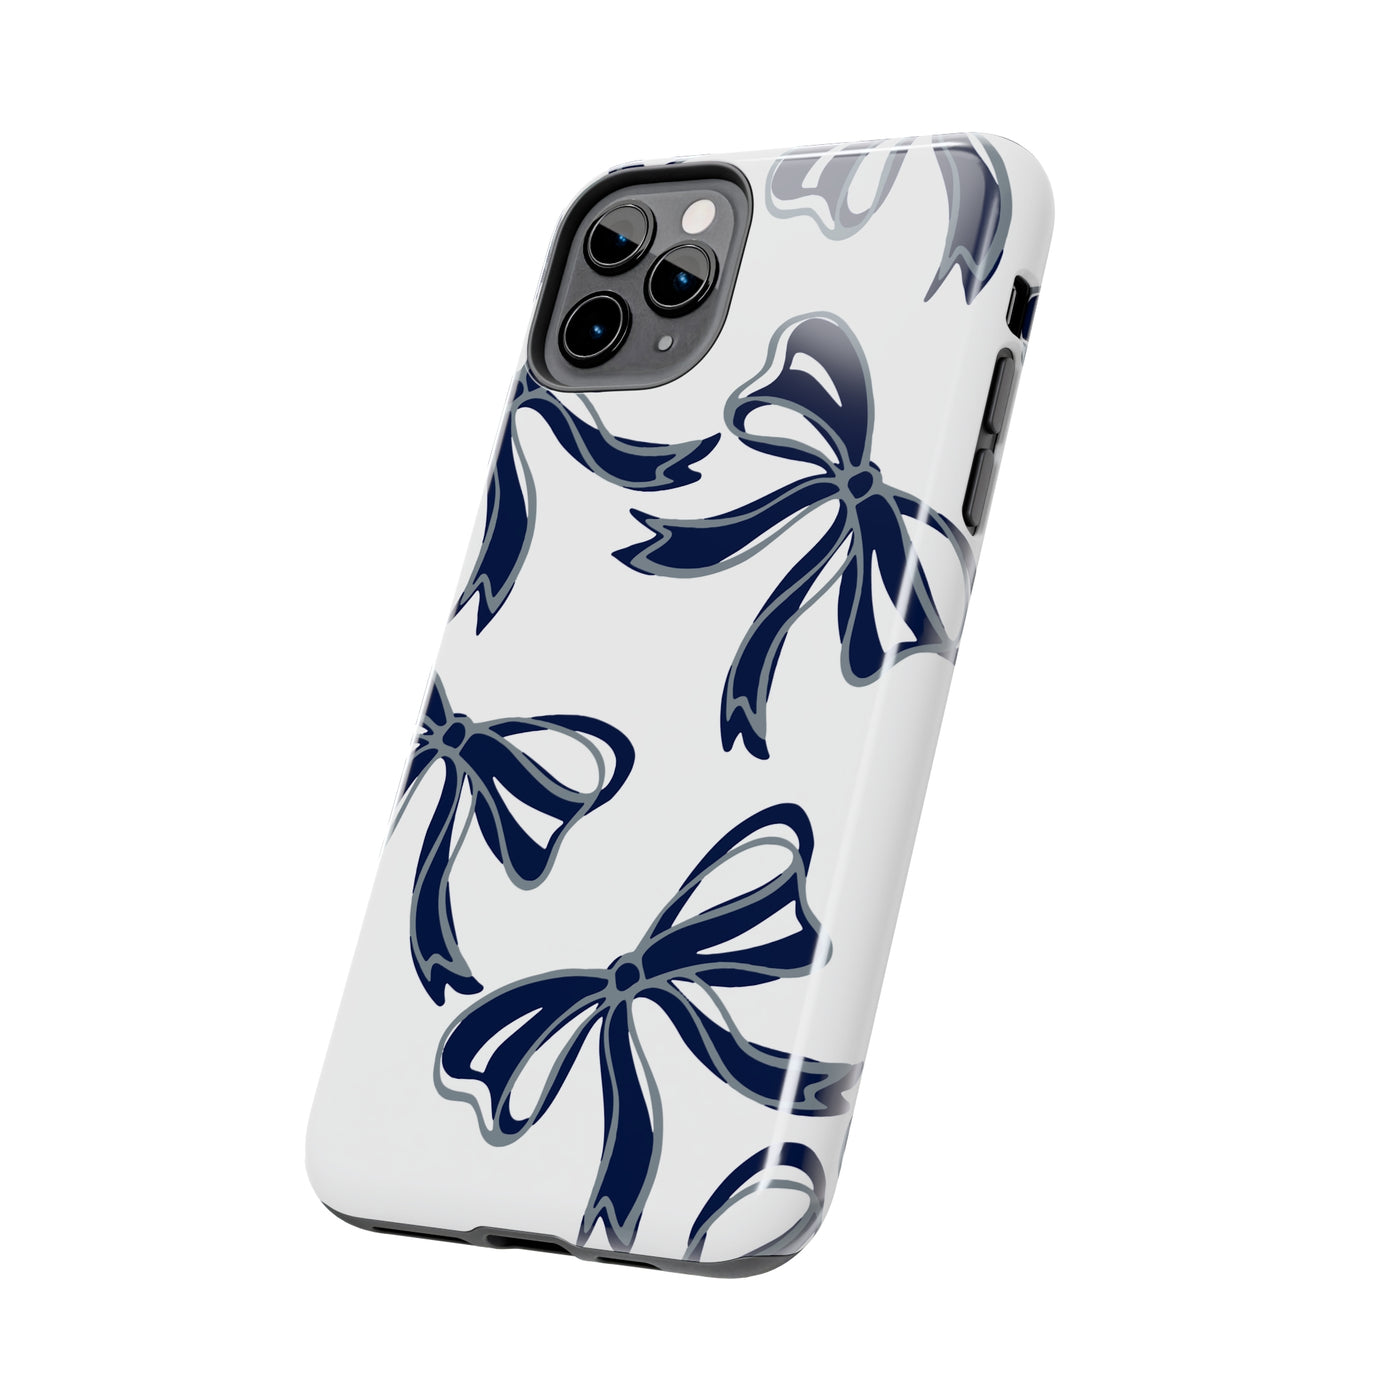 Trendy Bow Phone Case, Bed Party Bow Iphone case, Bow Phone Case, - Monmouth, UConn, Huskies, navy and white, navy and grey